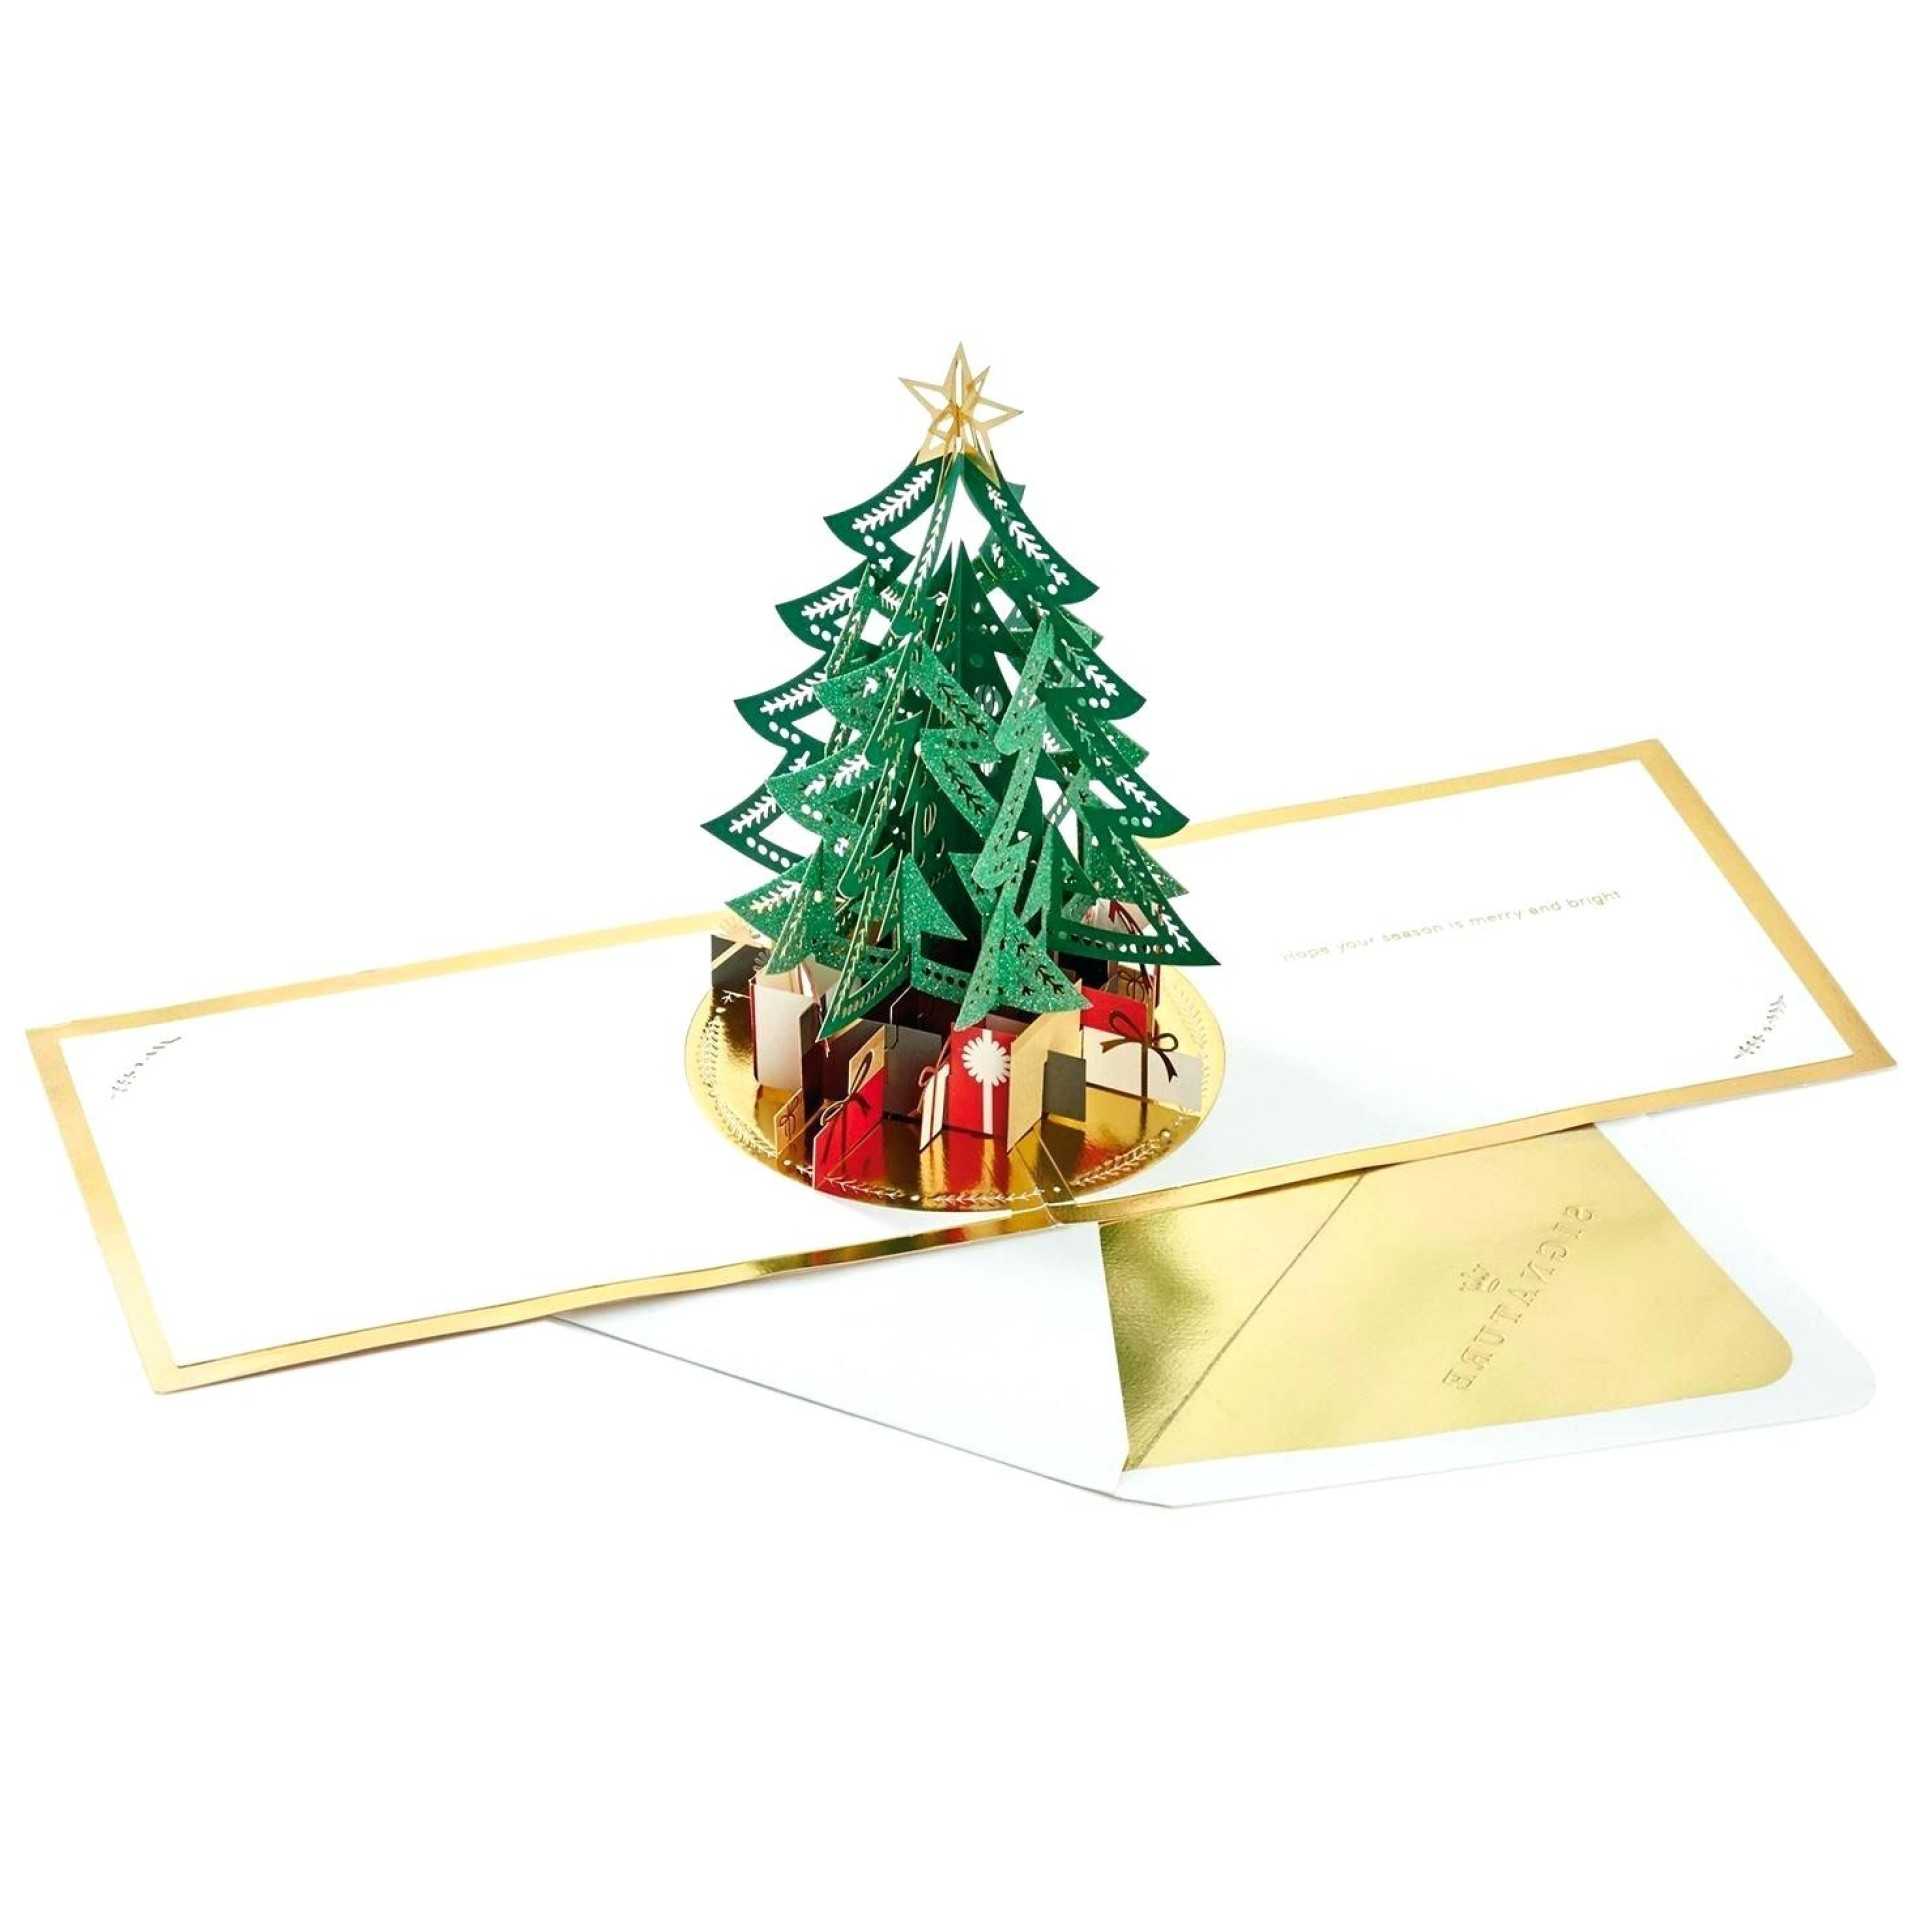 027 84614 10951579724 9338E5D5 Dca2 4412 9F59 413344C84Caf With 3D Christmas Tree Card Template